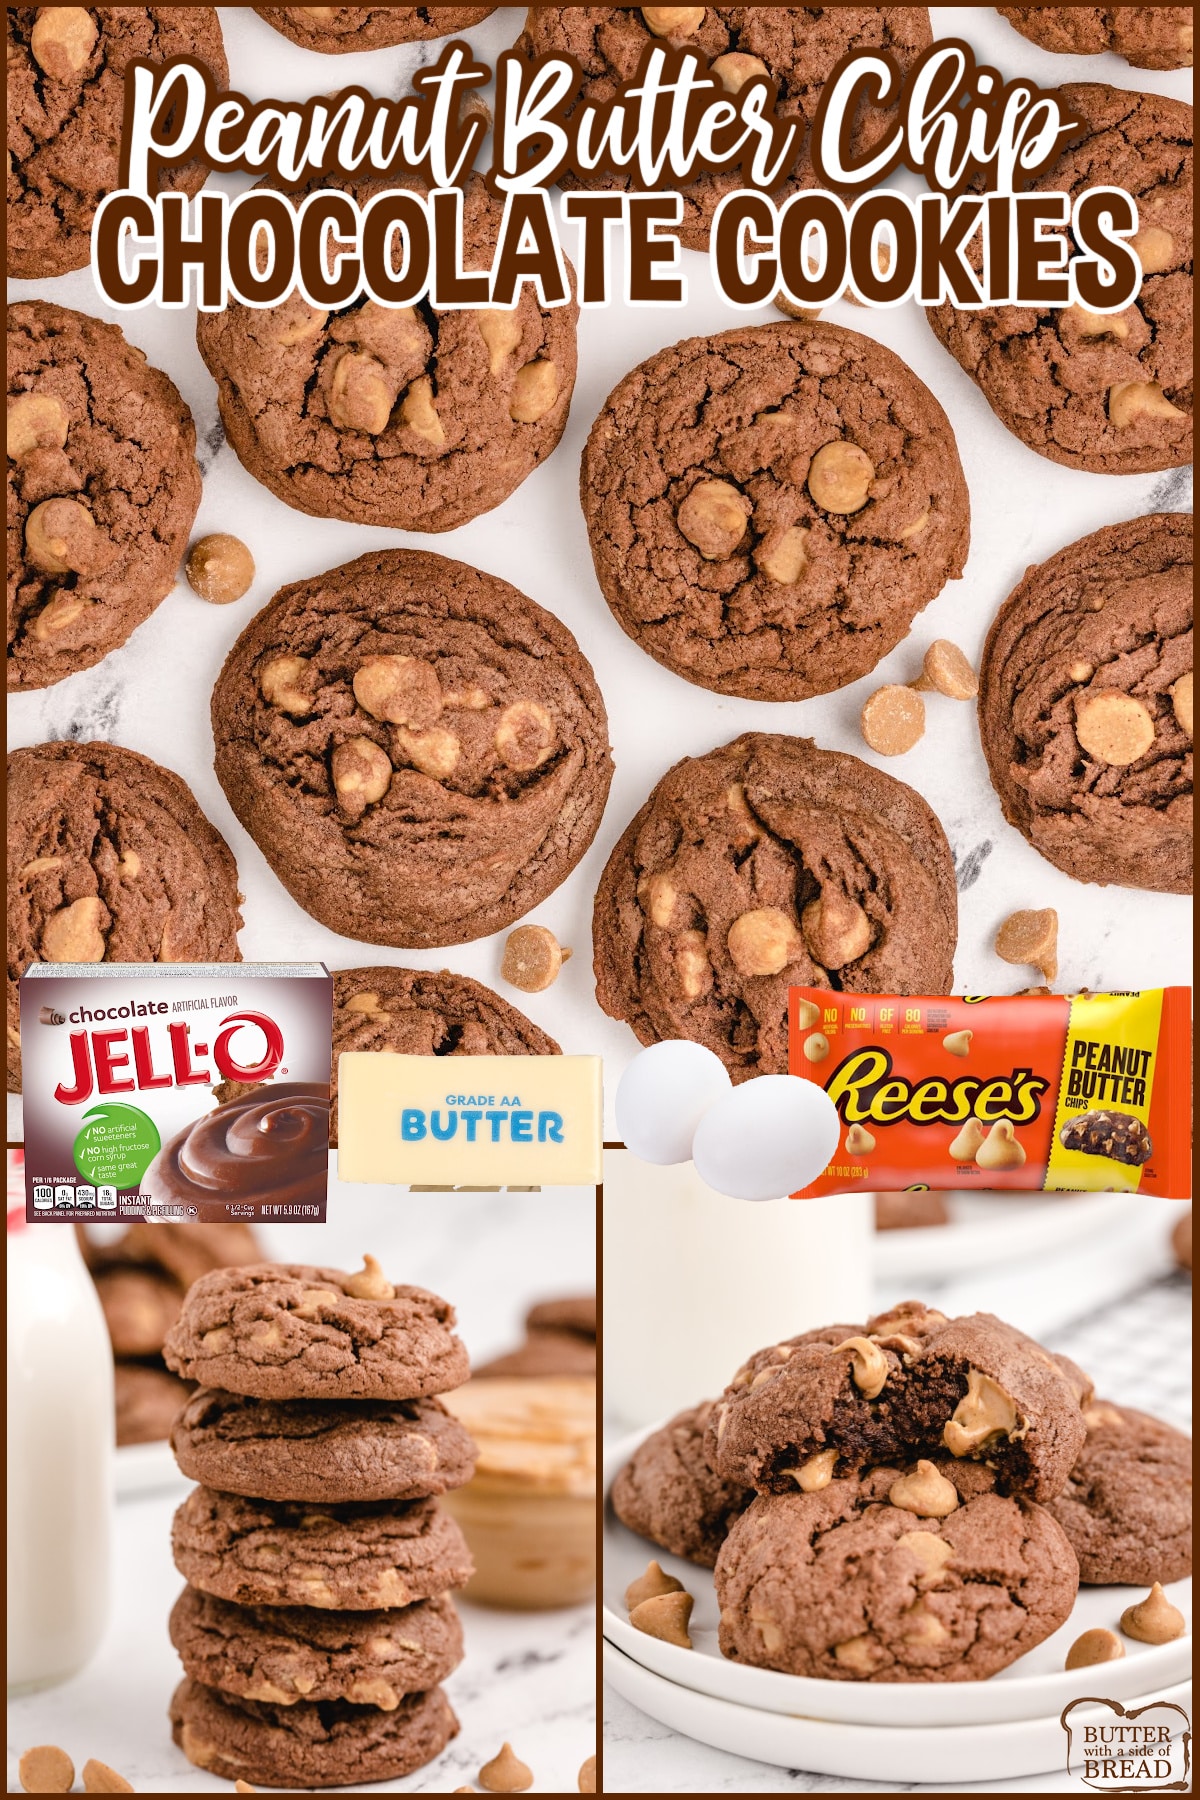 Chocolate Peanut Butter Chip Cookies made with chocolate pudding mix and Reese's peanut butter chips. Deliciously soft and chewy cookies with tons of chocolate and peanut butter flavor! 